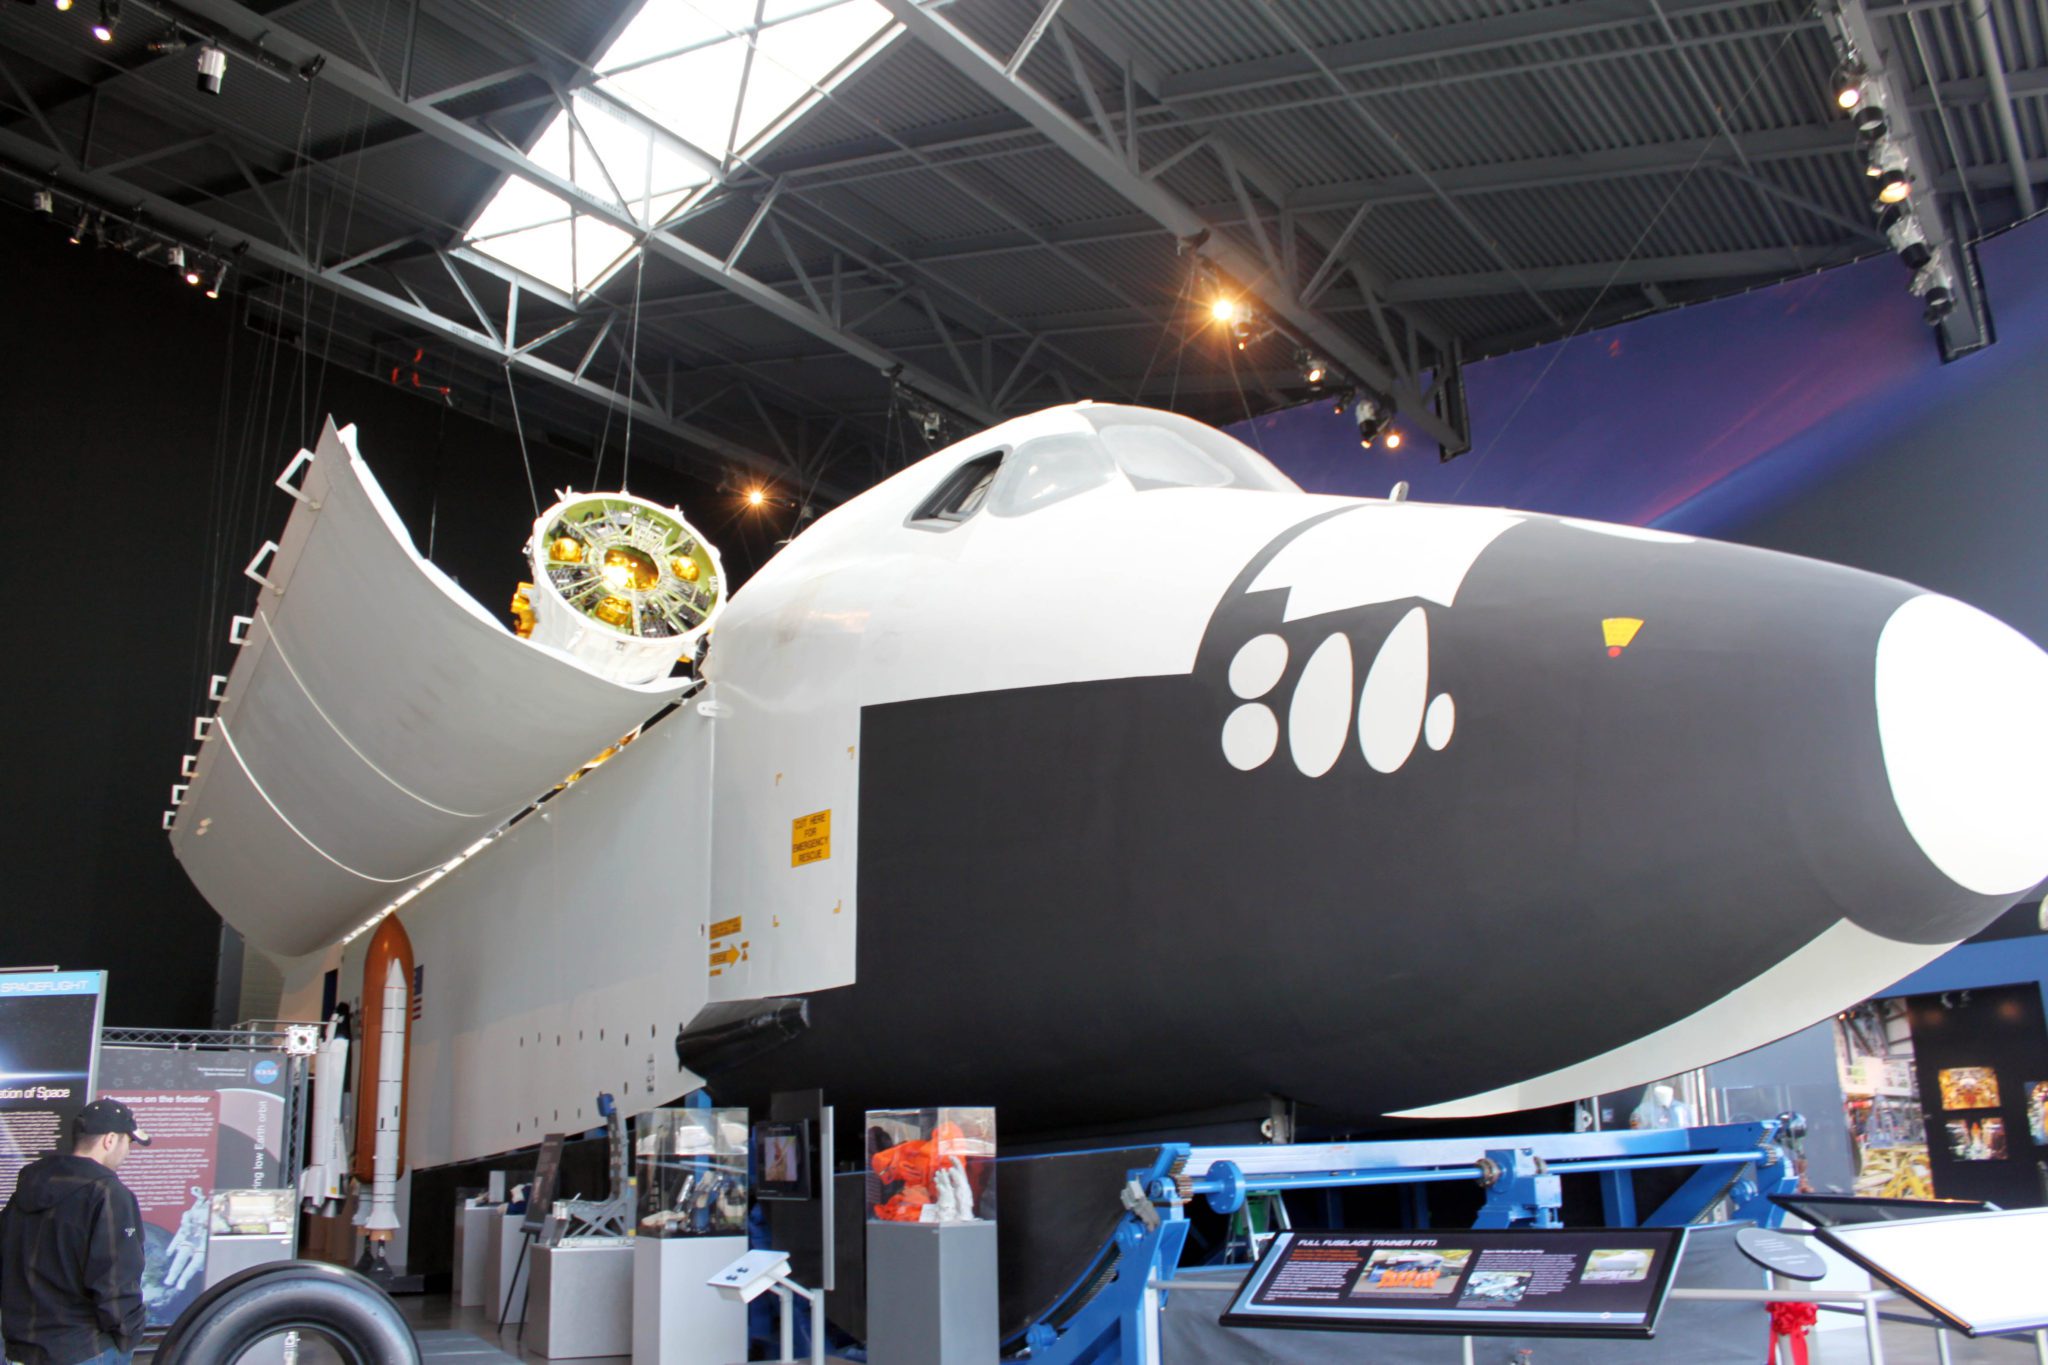 Visit the largest air and space museum in the world at Seattle's Museum of Flight- 10 things to do in Seattle with kids #Seattle #washington #museumofflight